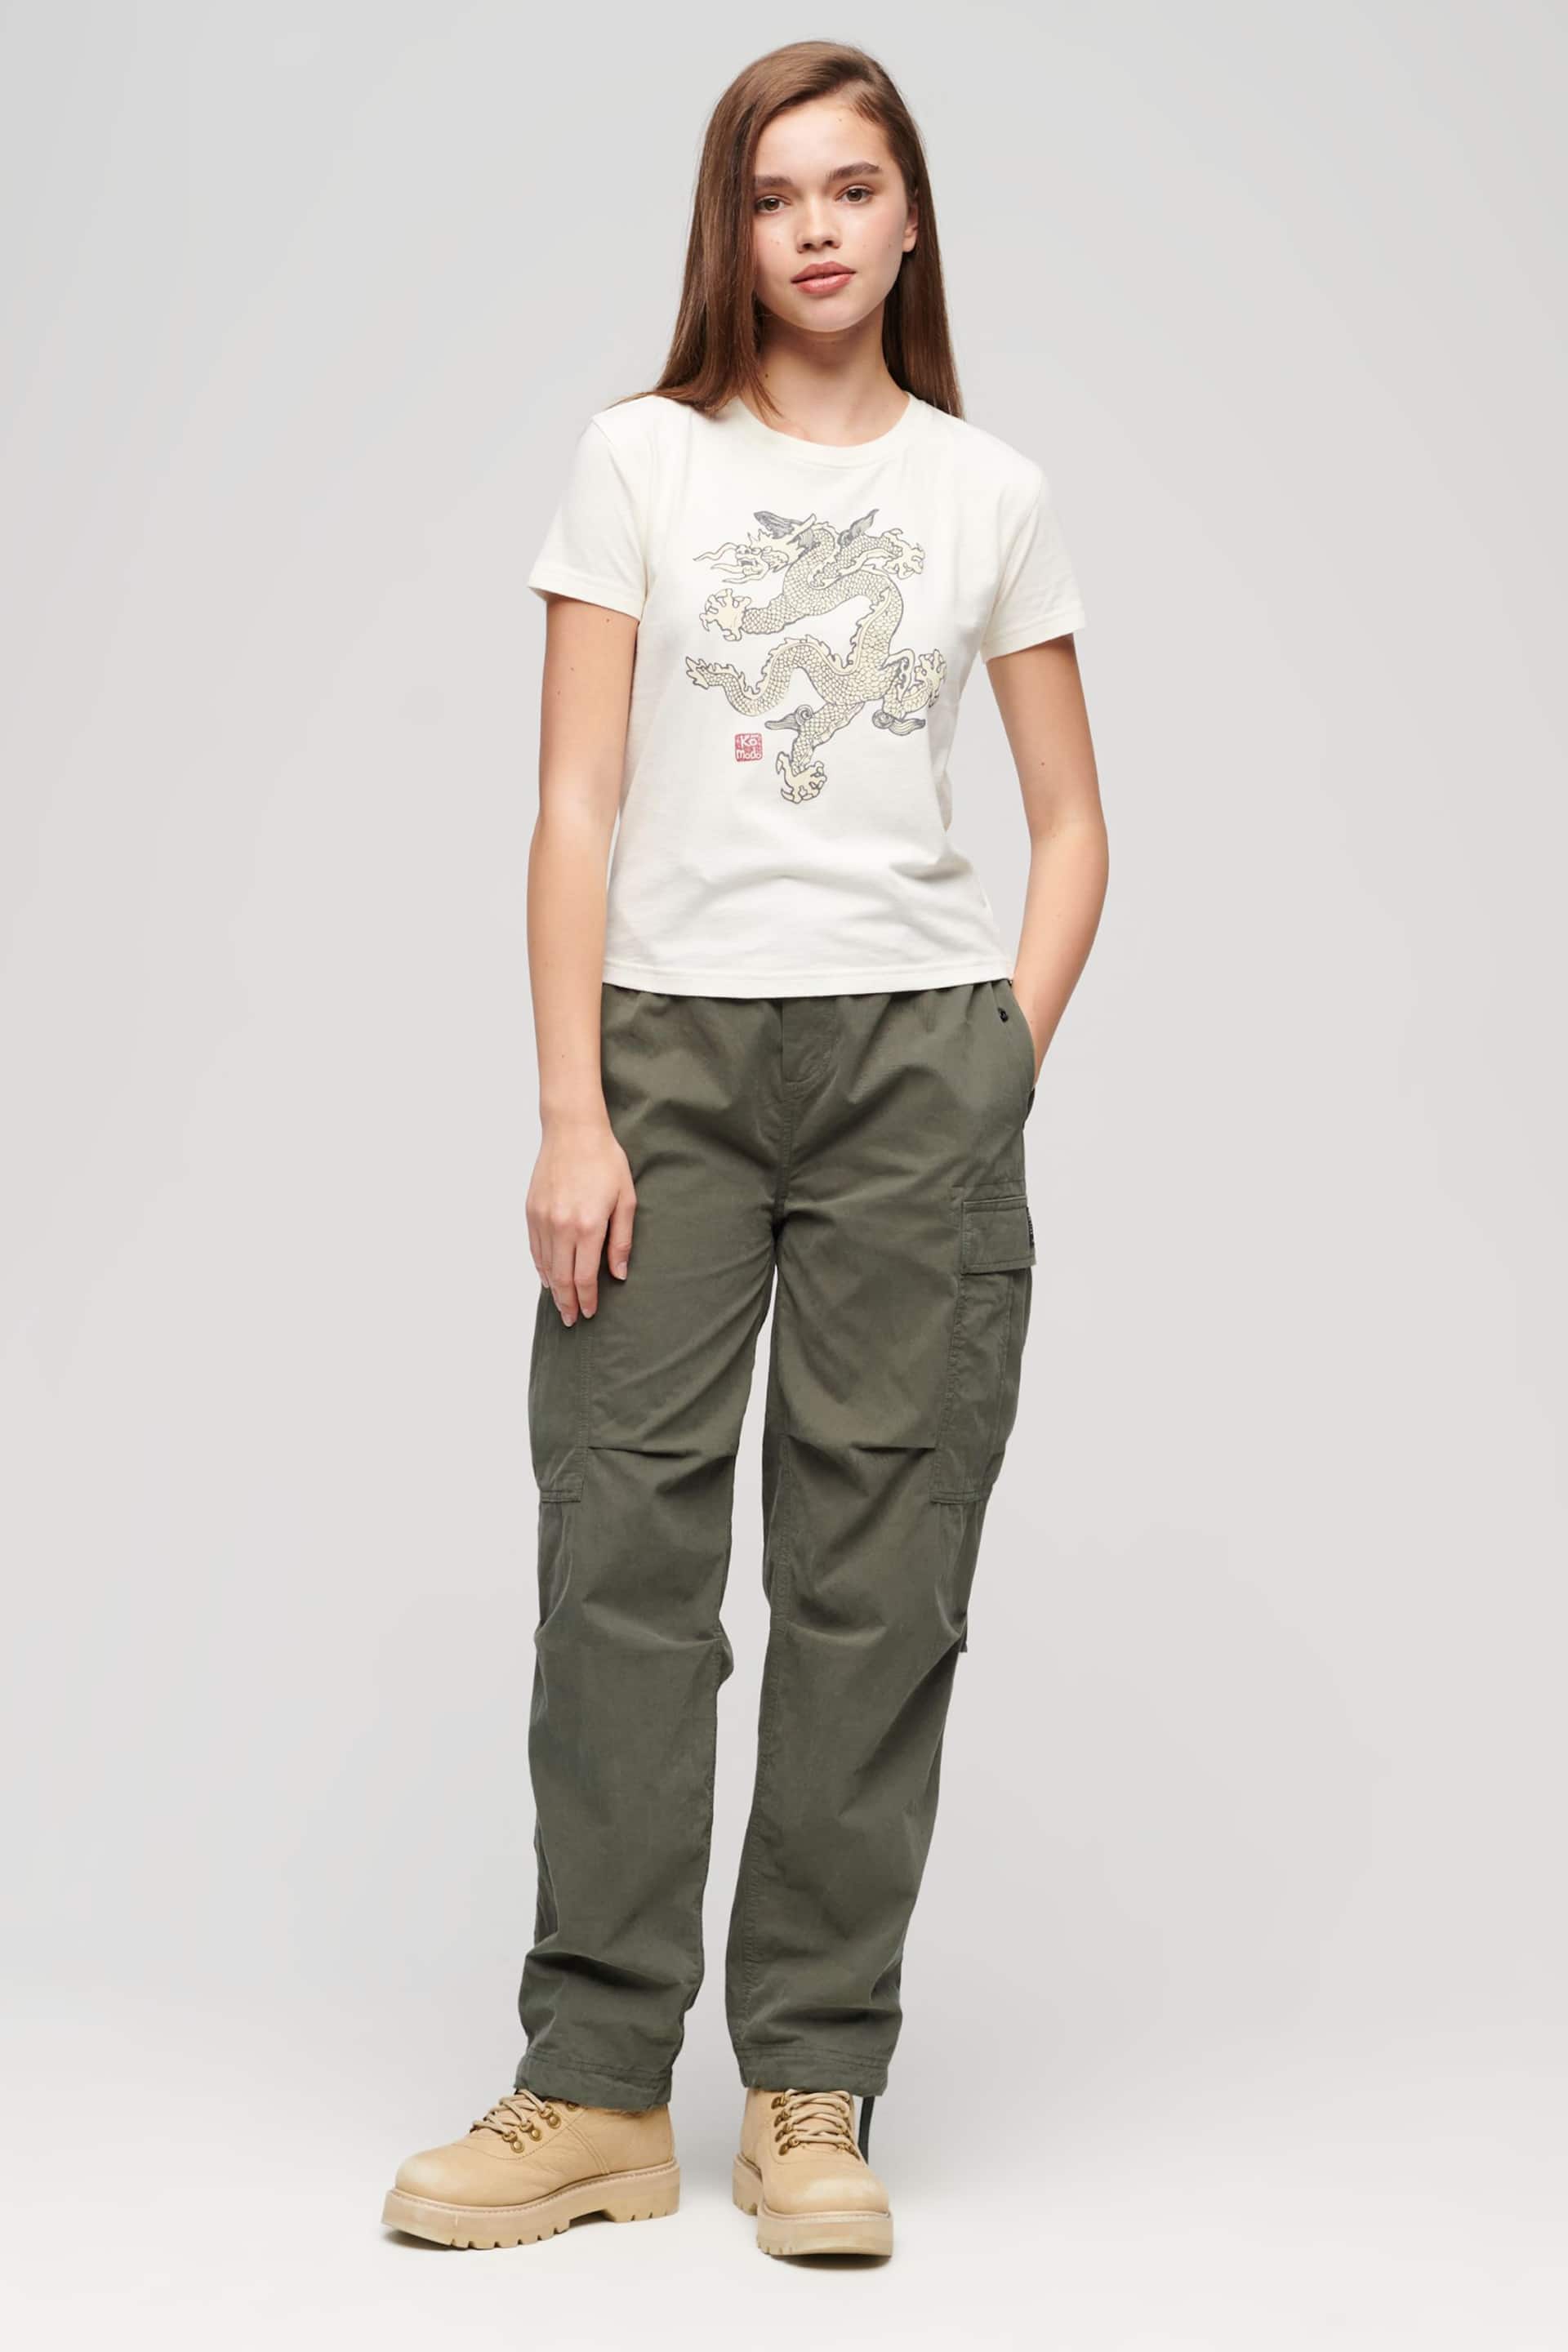 Superdry Green Parachute Grip Trousers - Image 3 of 3